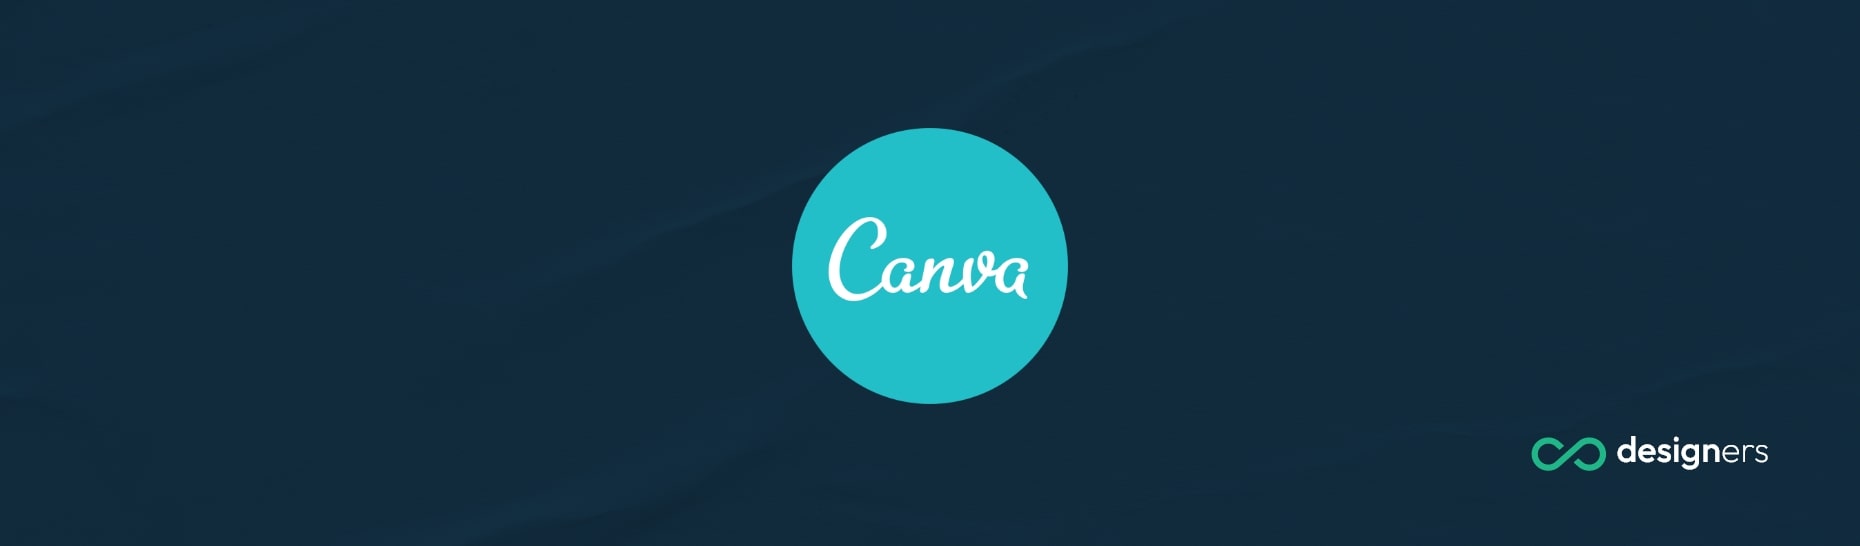 What Font Is Cambria in Canva?